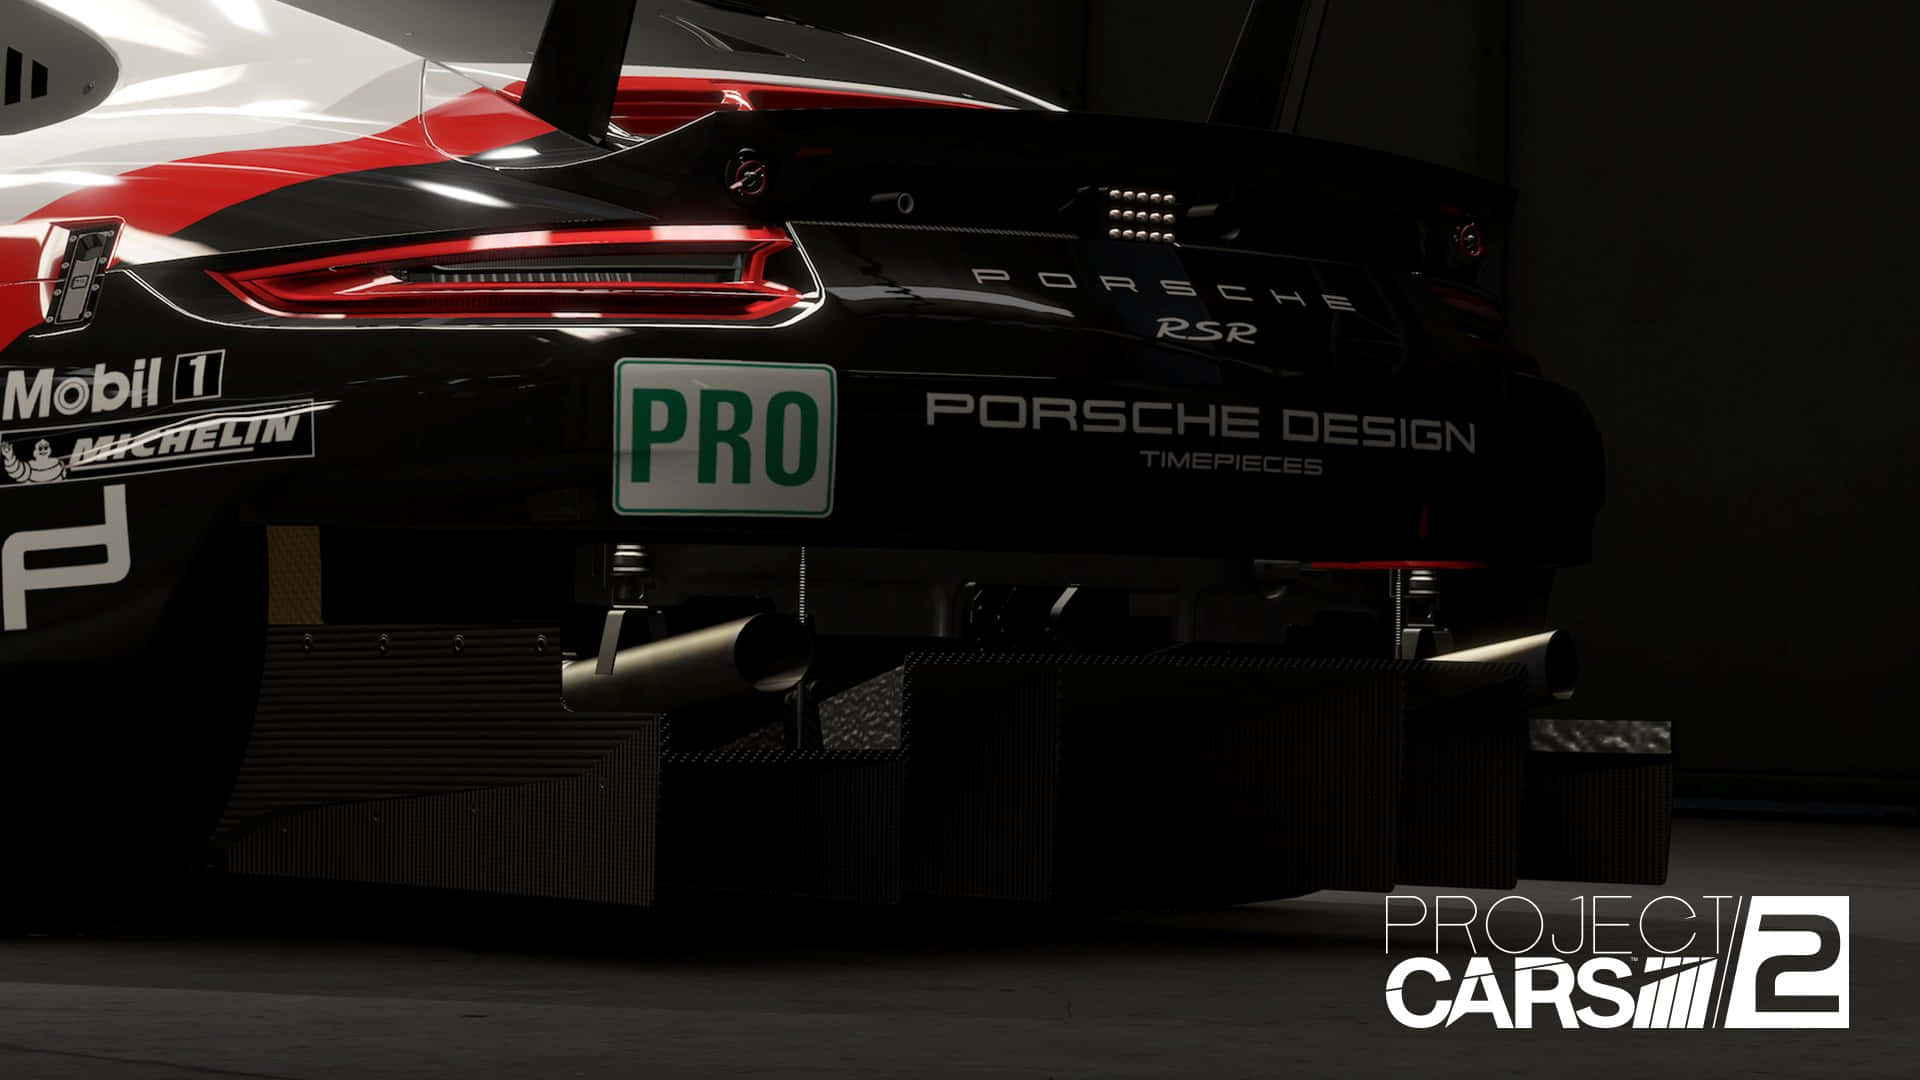 Race for the Win in 'Project Cars'